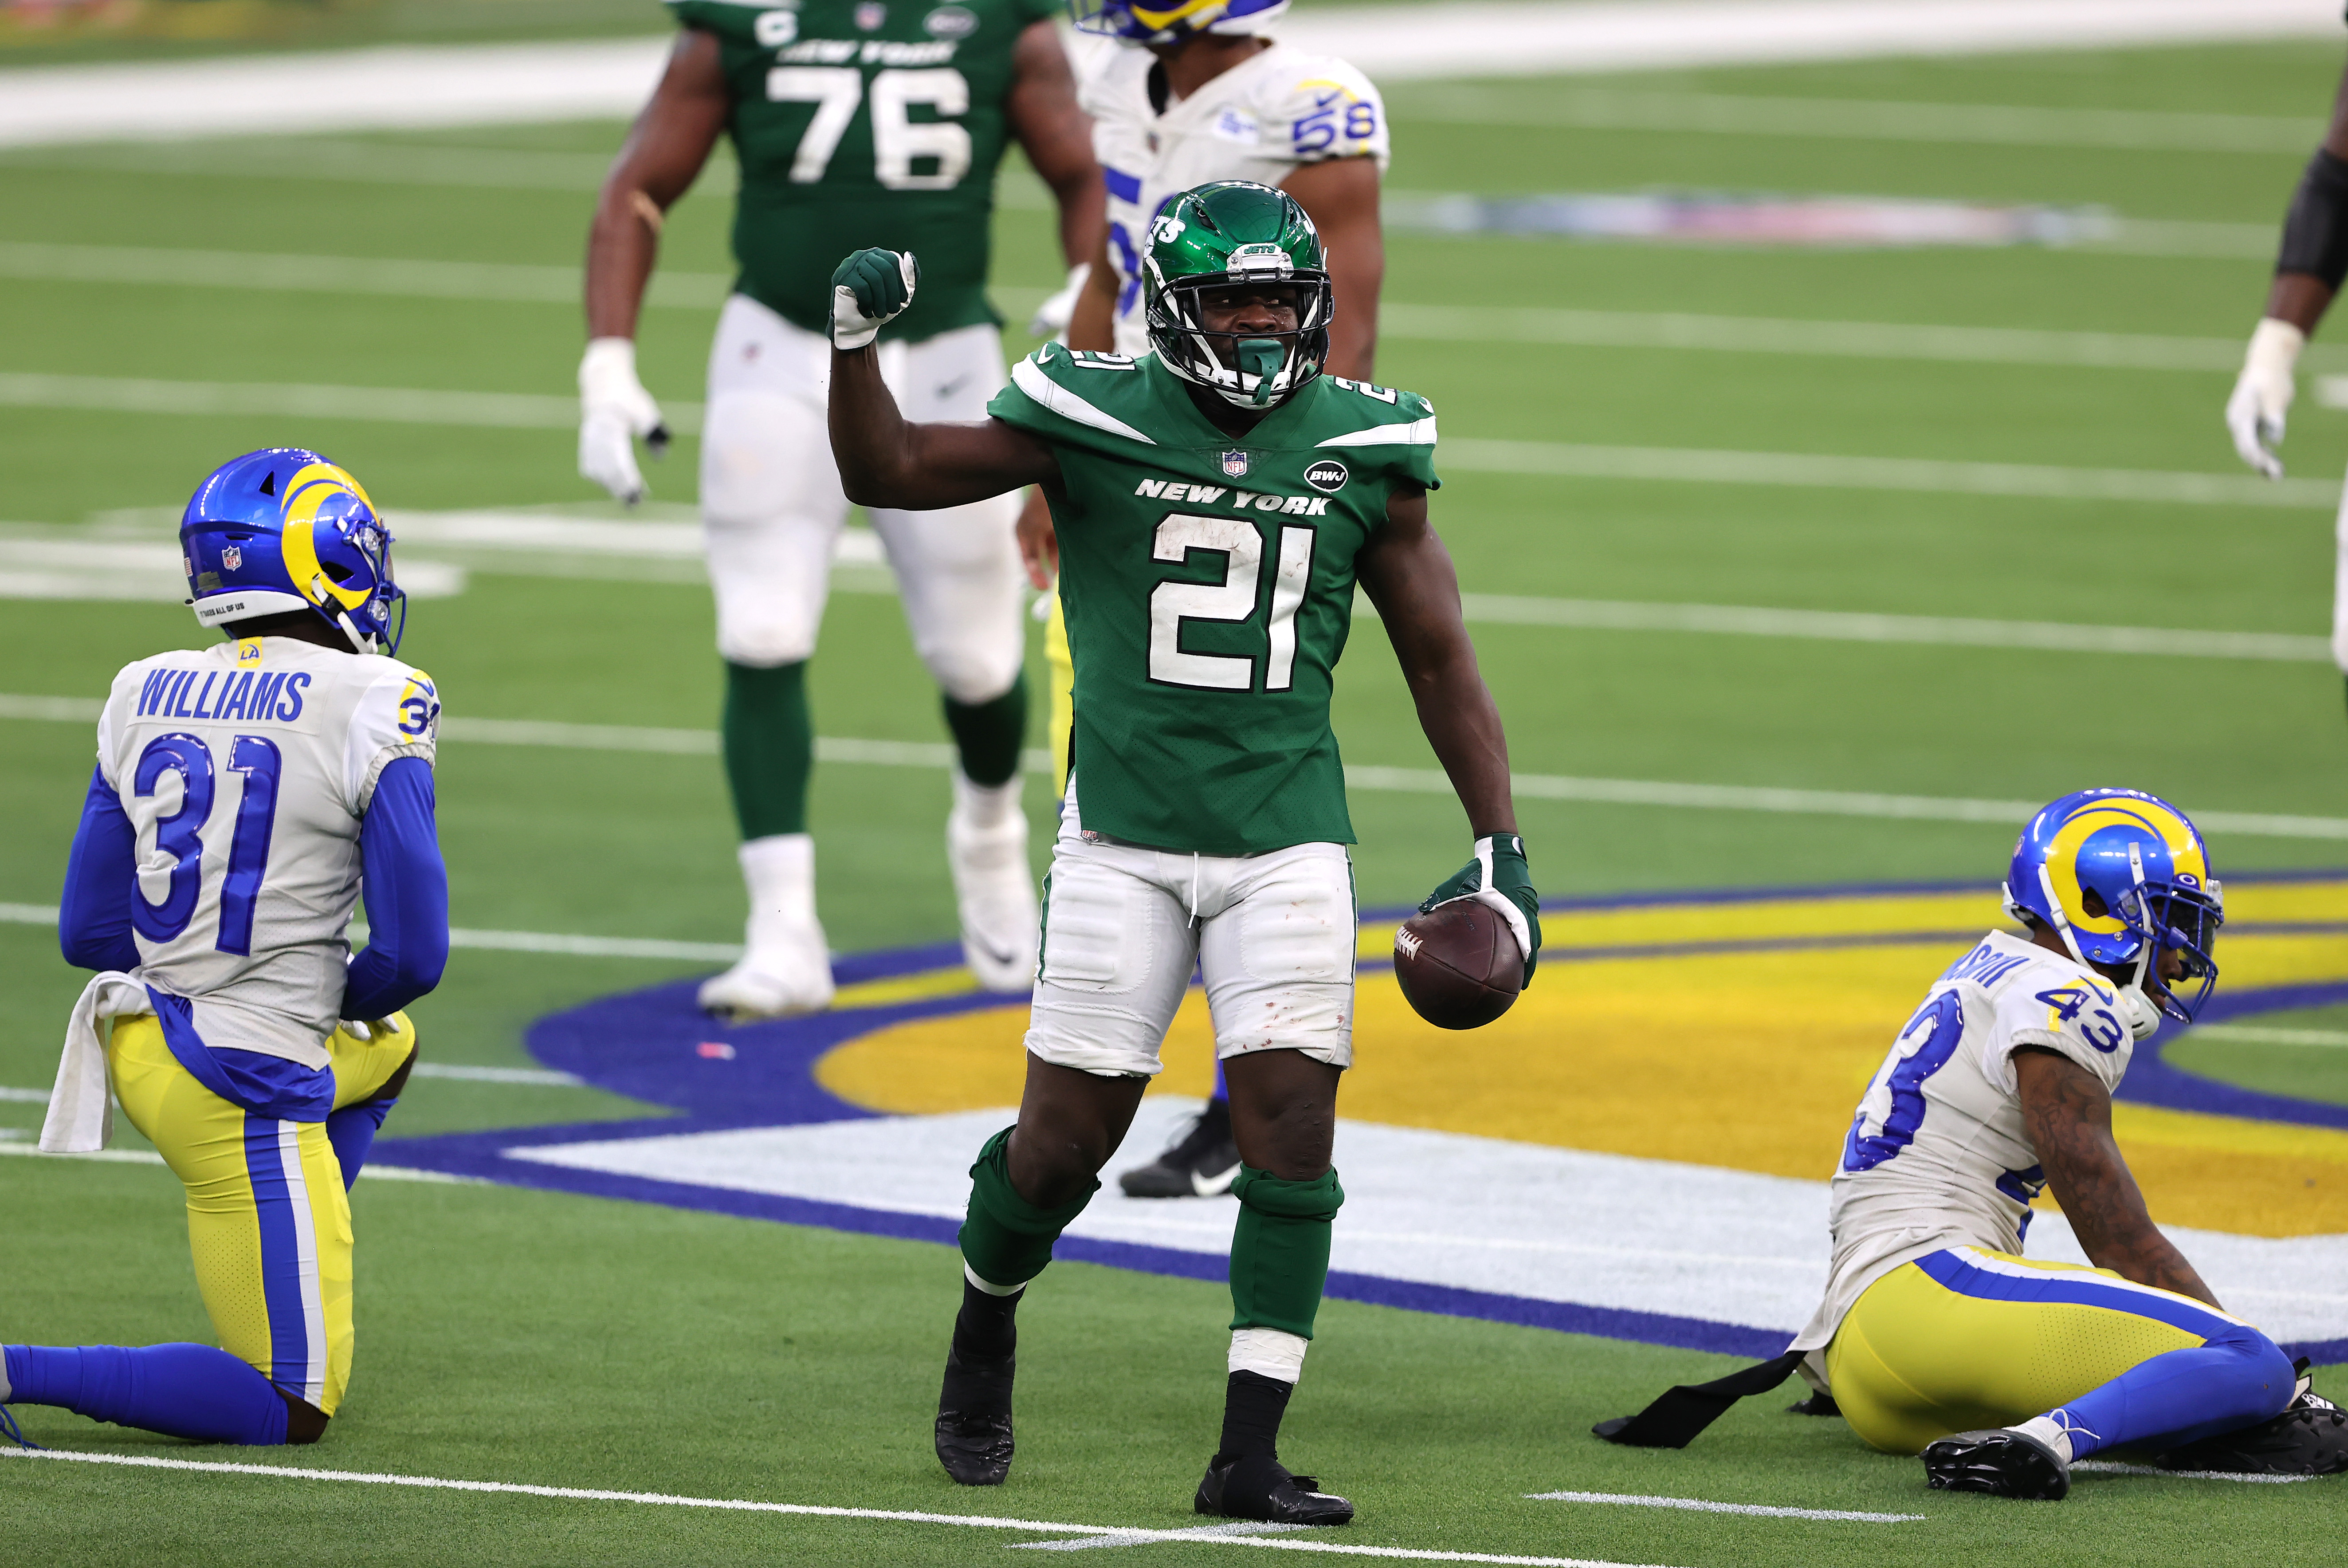 Darious Williams #31 and John Johnson #43 of the Los Angeles Rams look on as Frank Gore #21 of the New York Jets reacts to extra yards during the second half of a game at SoFi Stadium on December 20, 2020 in Inglewood, California.